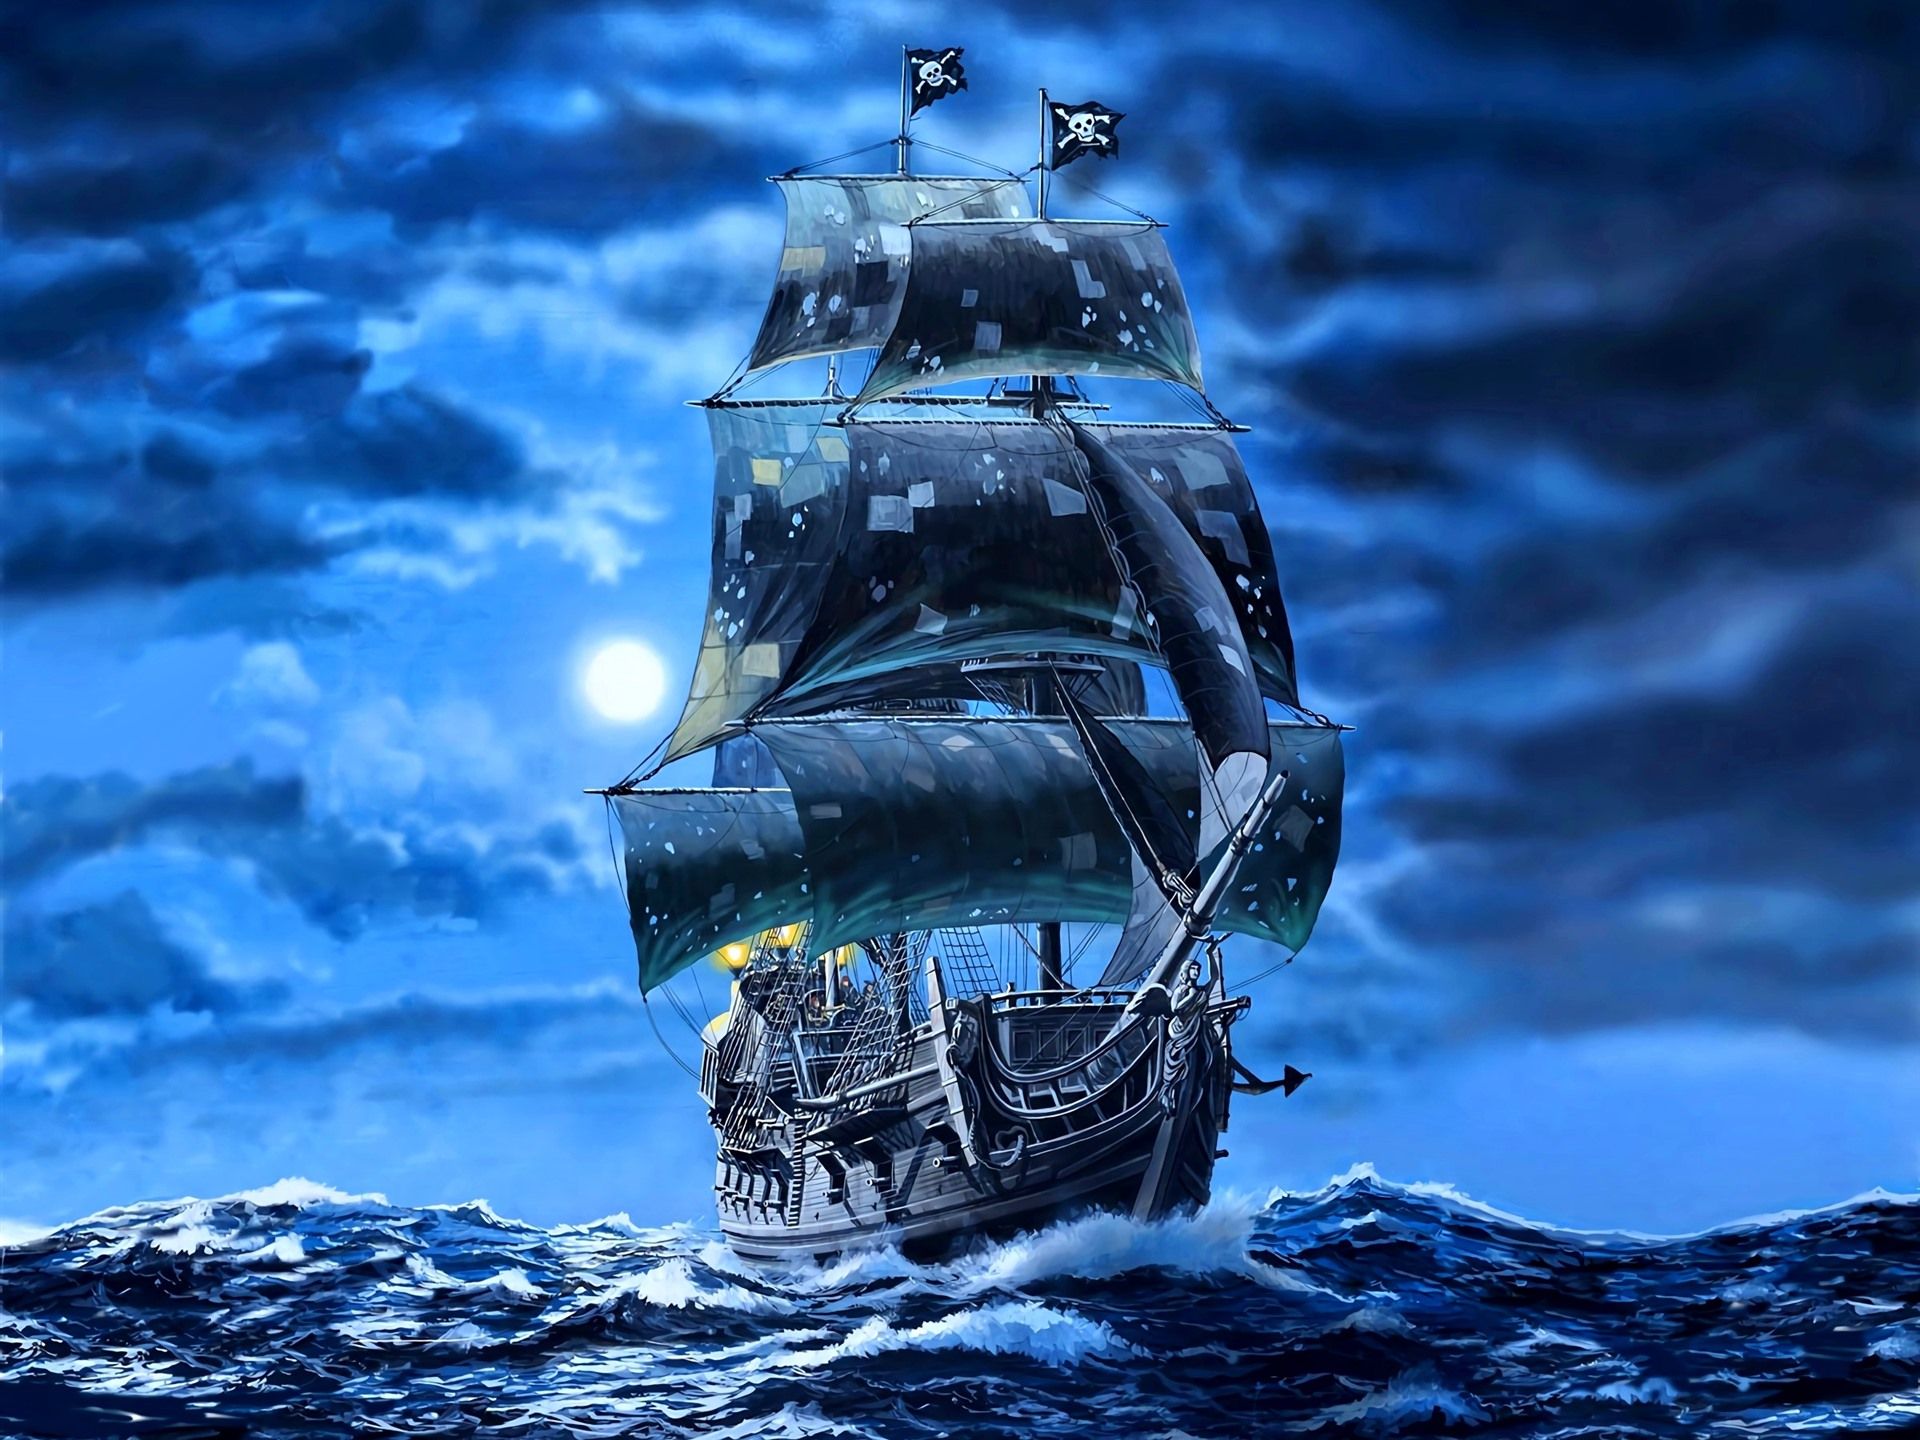 The Black Pearl Wallpapers - Wallpaper Cave